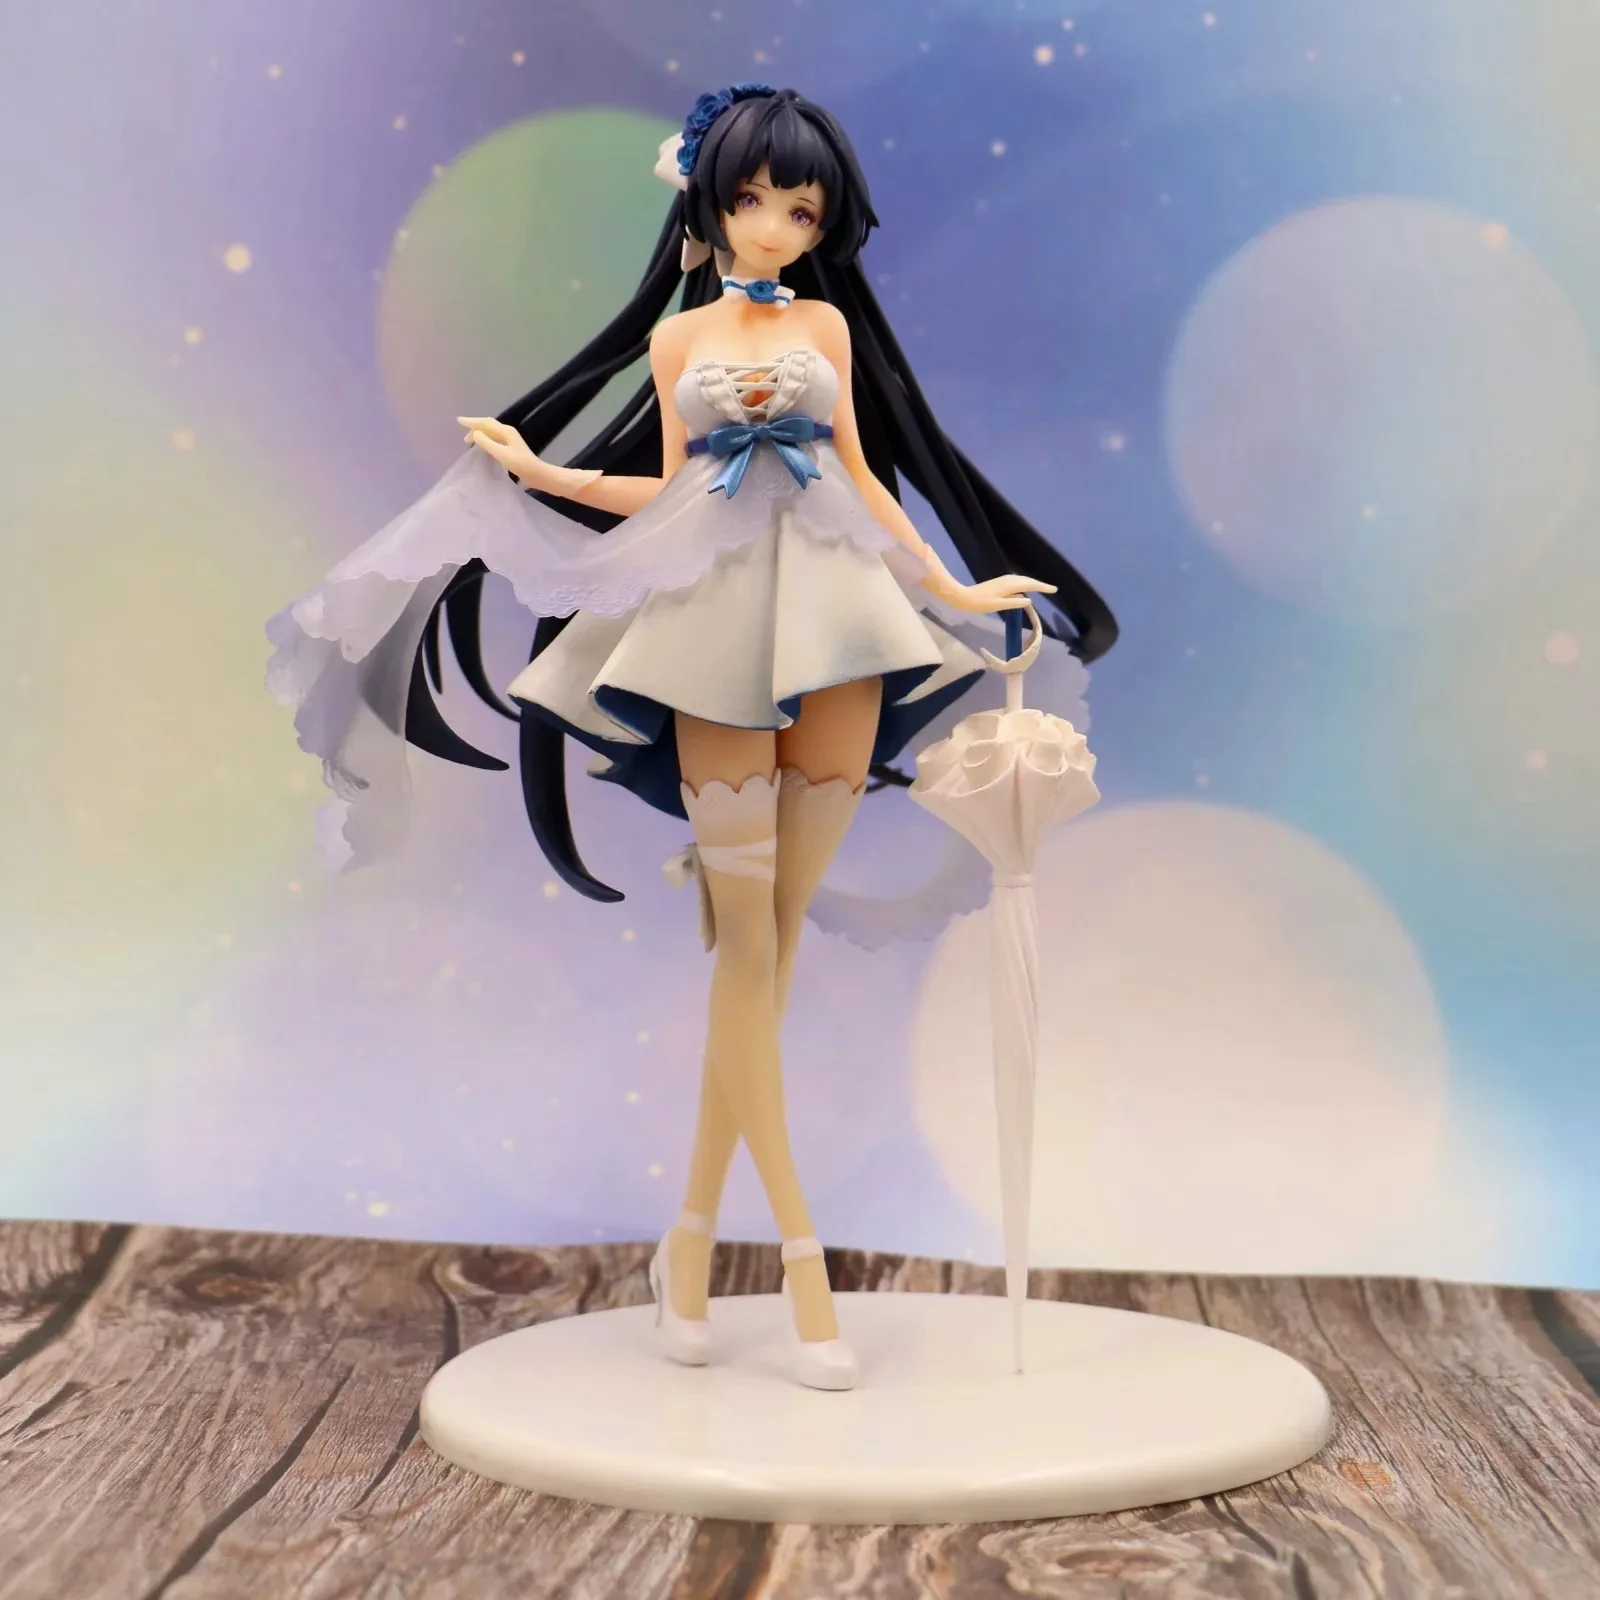 

Anime Sailor Moon Collapse 3 Flower Marriage Wedding Dress Lightning Bud Coat Standing Posture Sexy Action Figure Toys For Boy